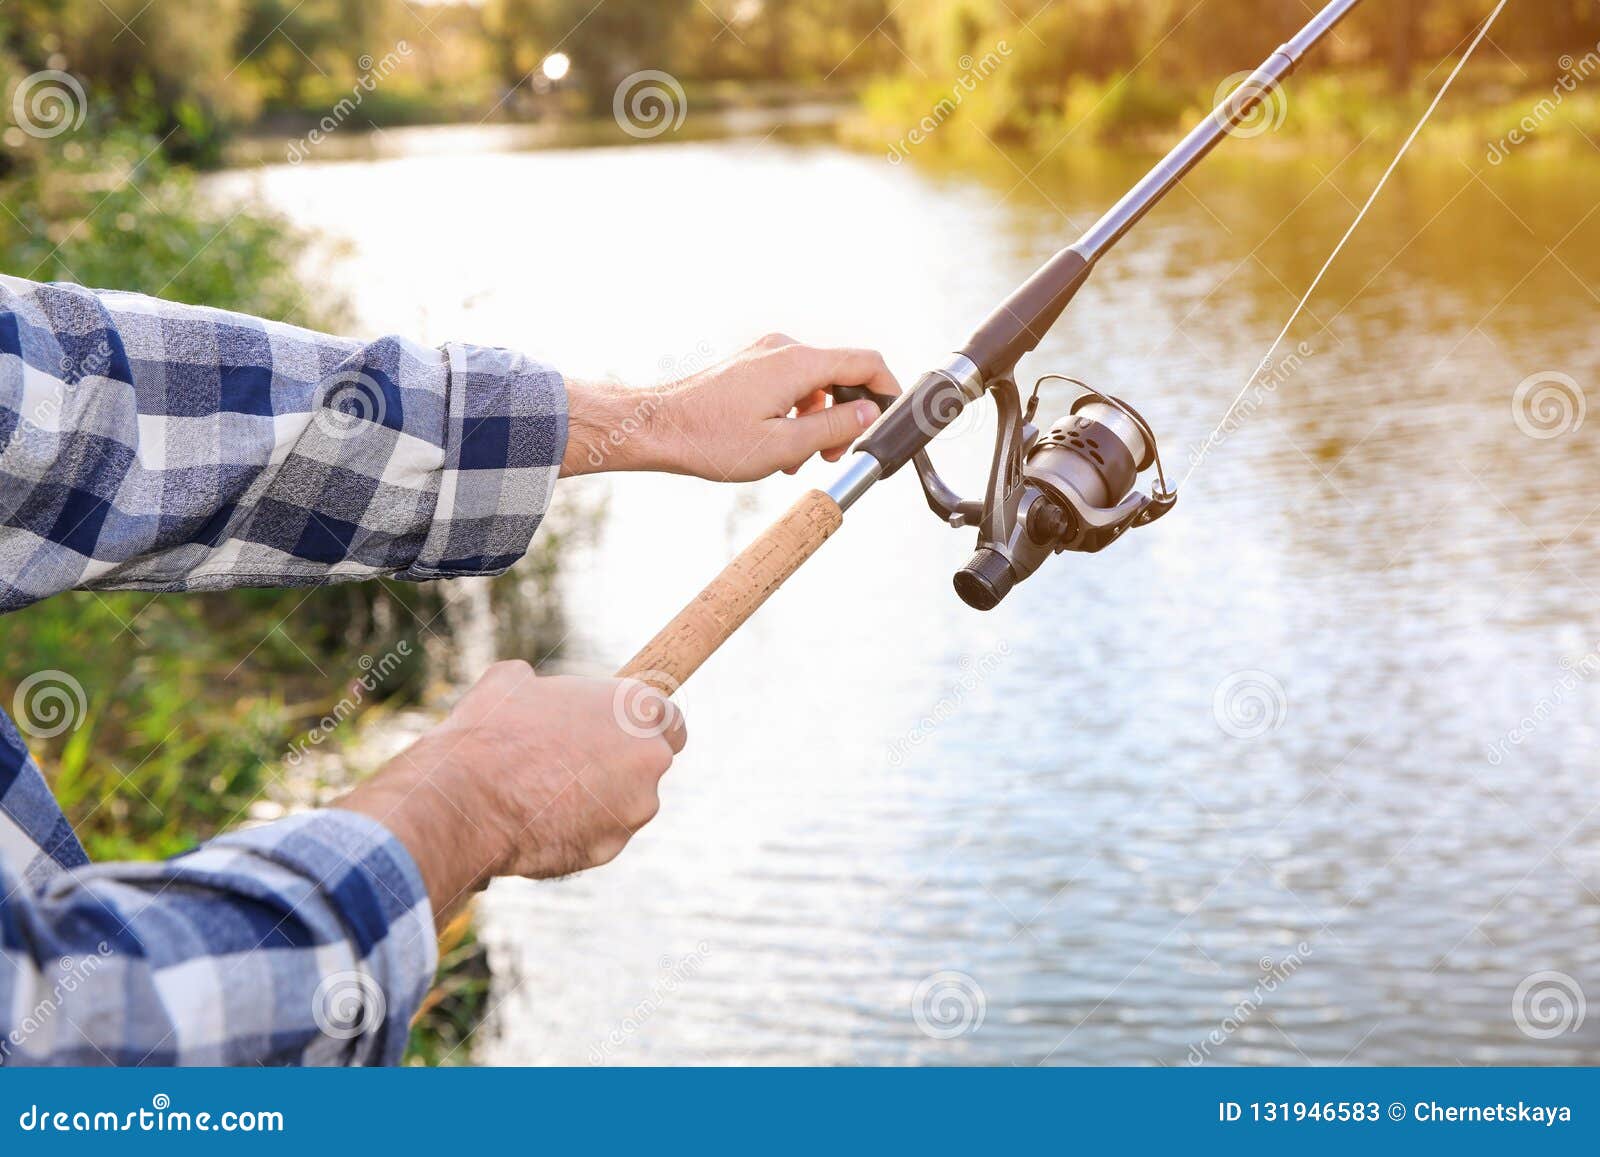 Man with Rod Fishing at Riverside, Focus on Hands Stock Image - Image of  river, angler: 131946583